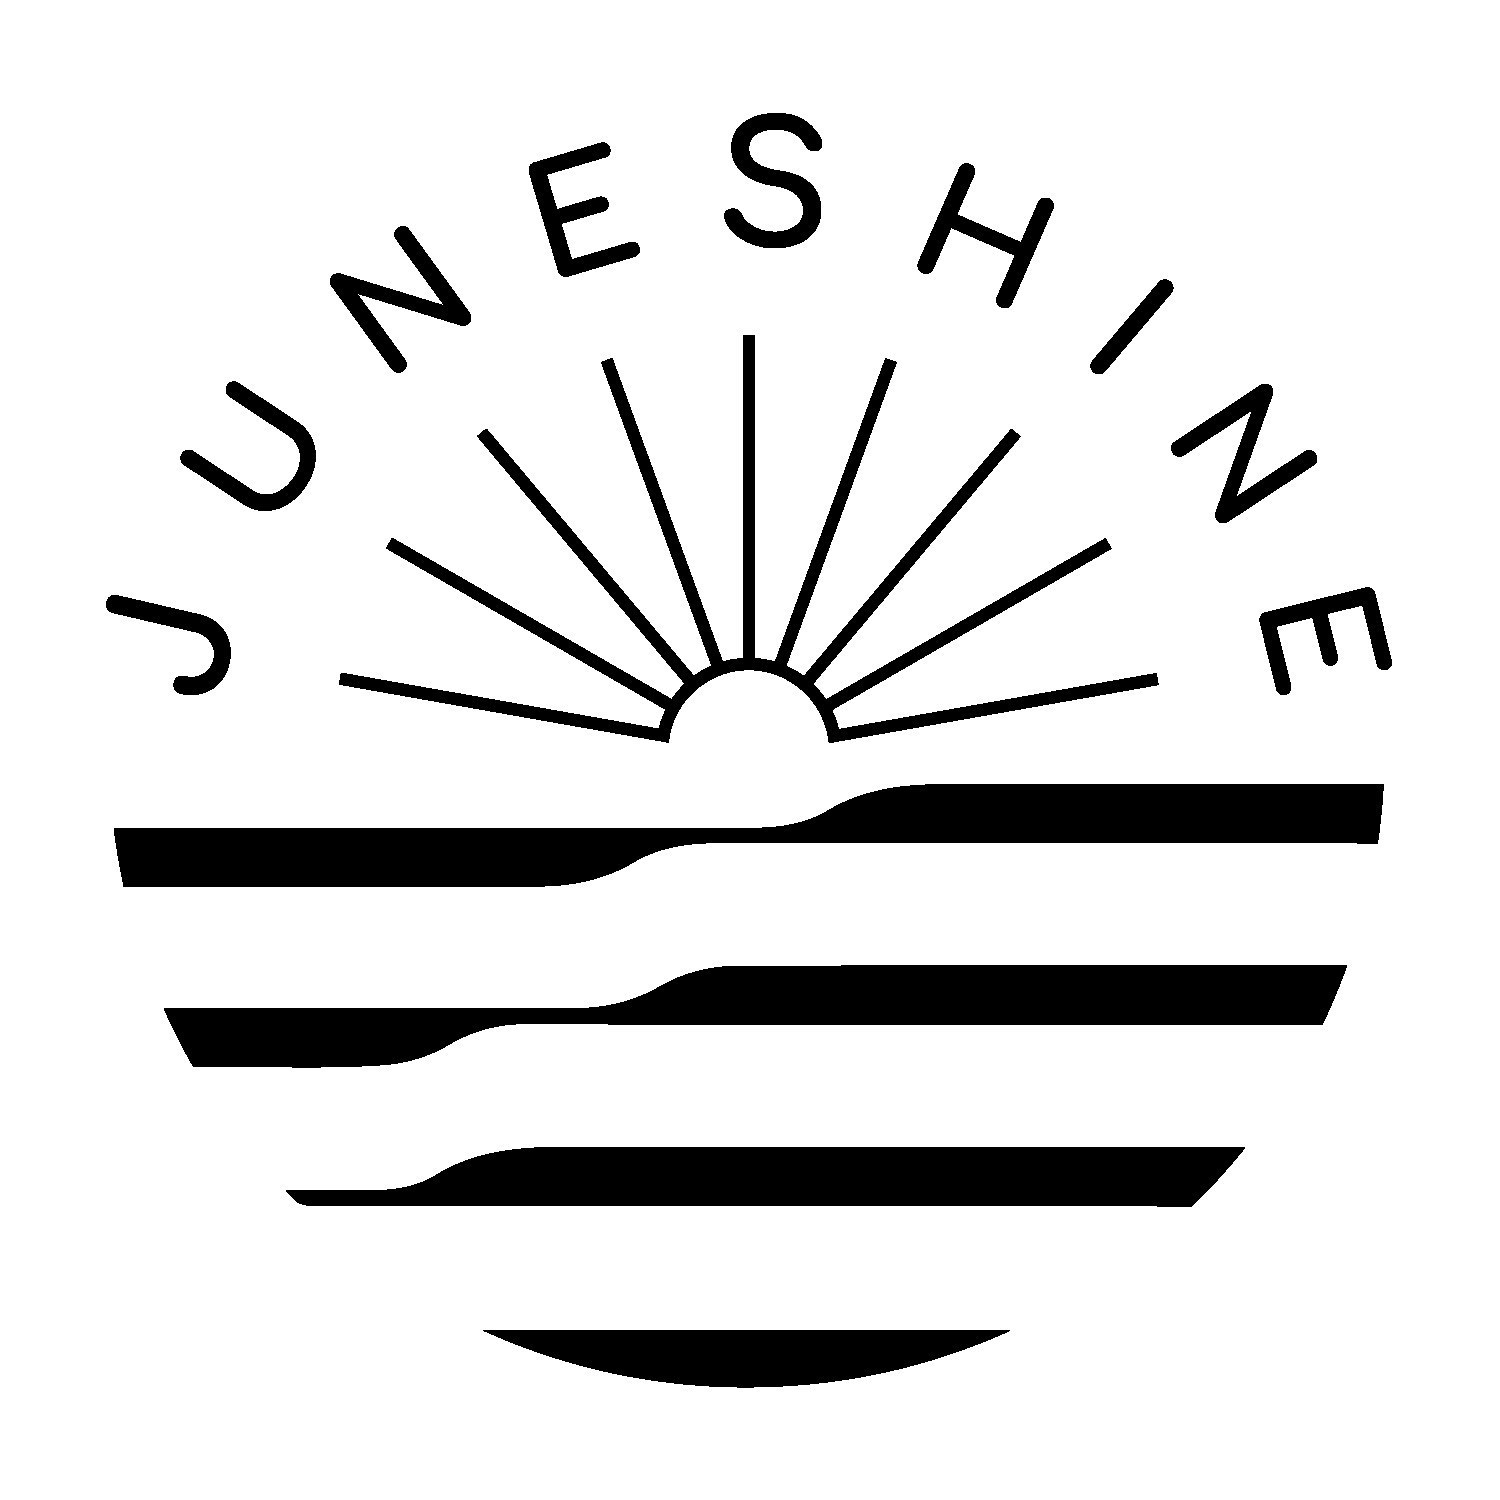 JuneShine is a provider of organic kombucha intended to offer a gluten-free drink. 